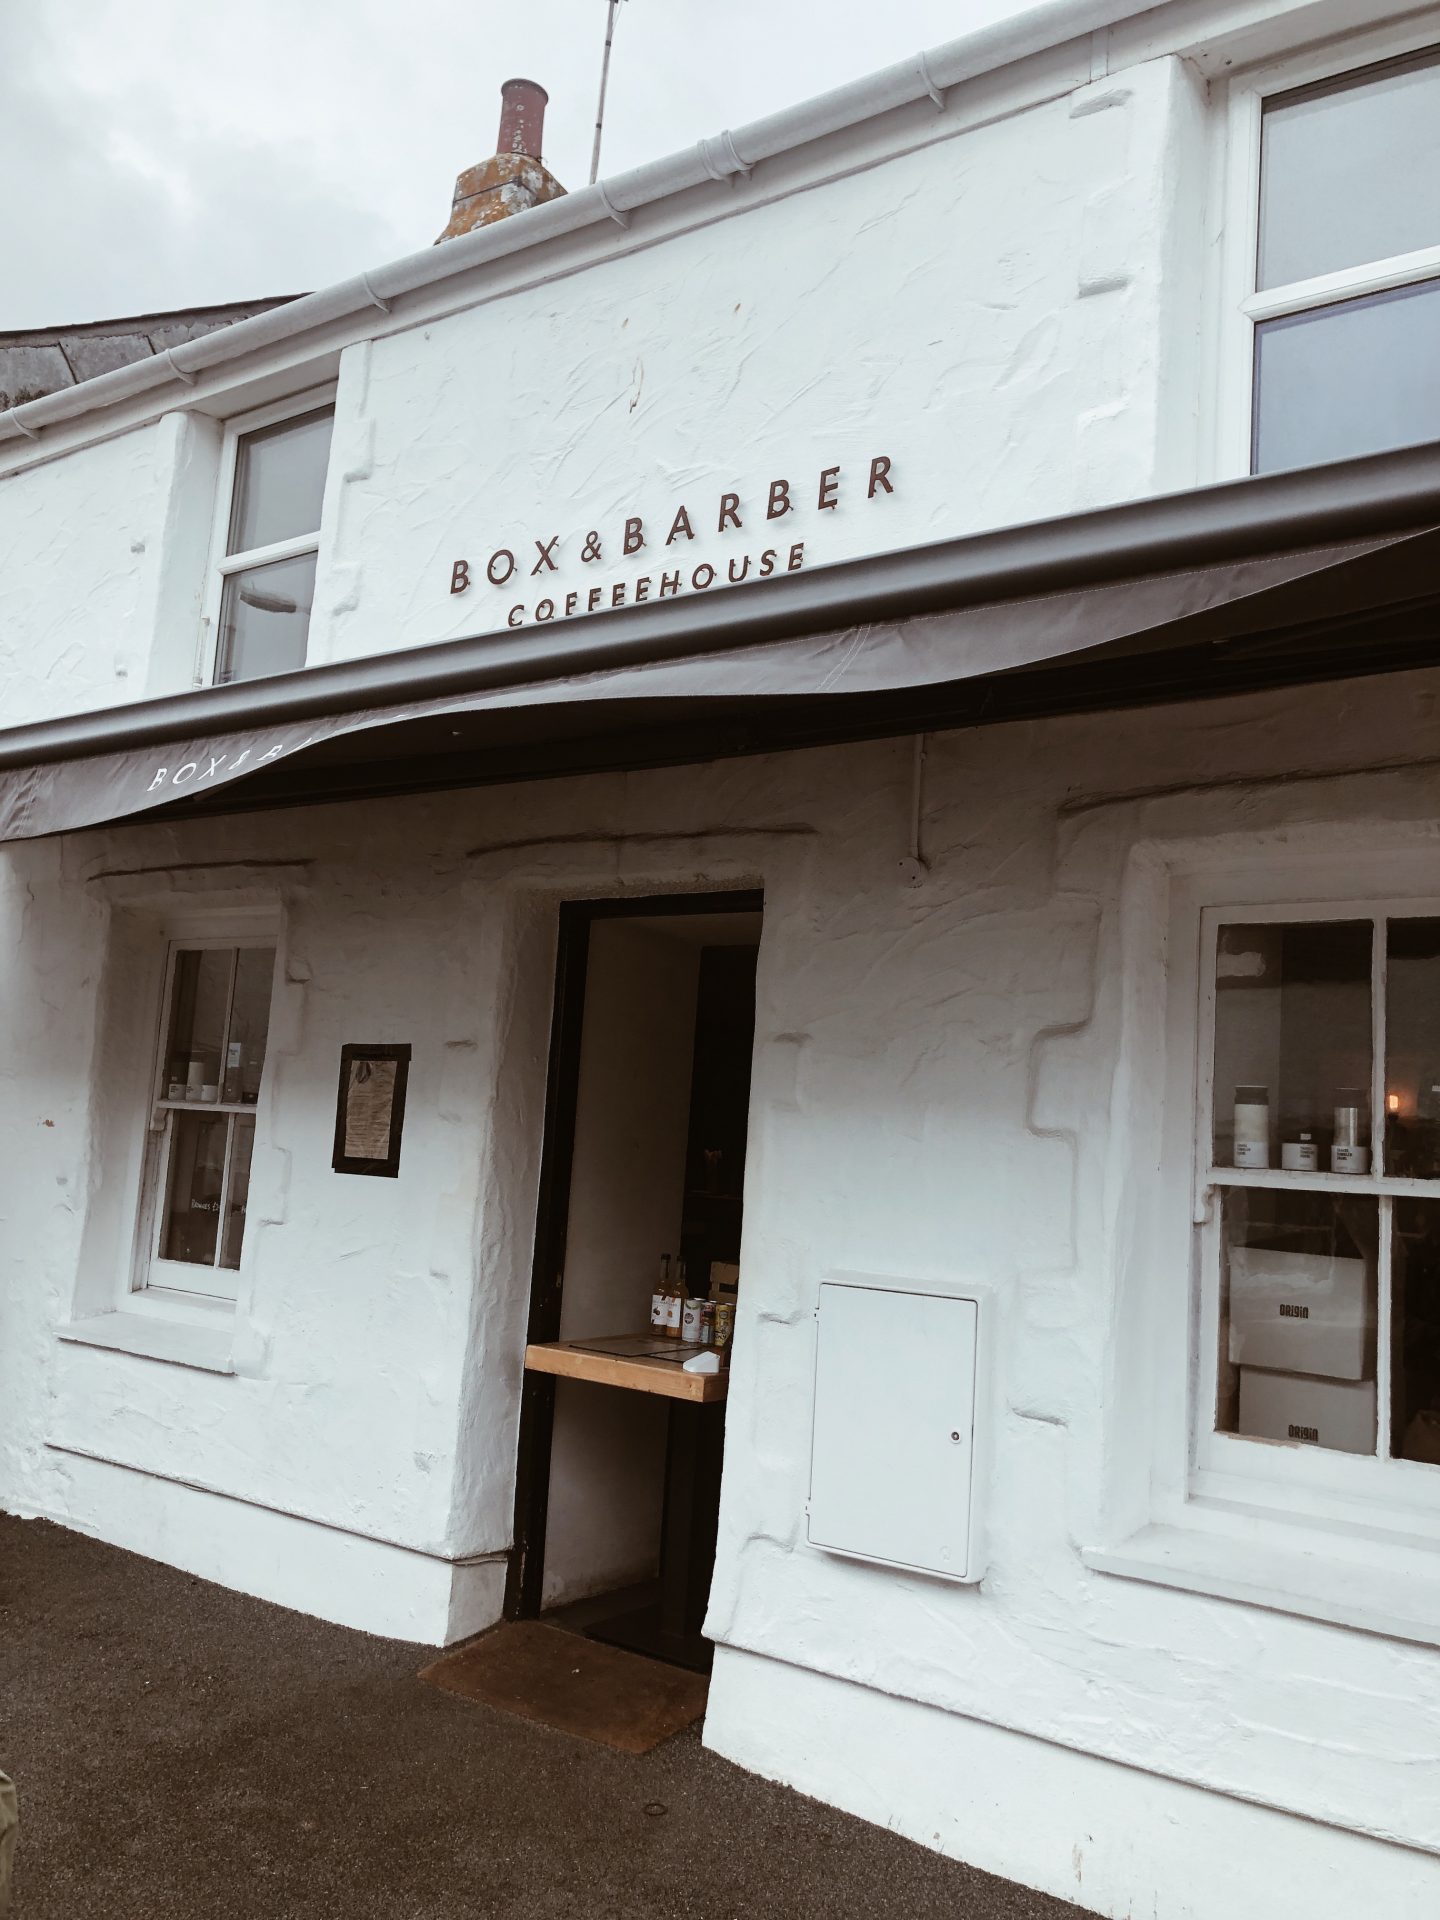 Things to do in newquay - box and barber